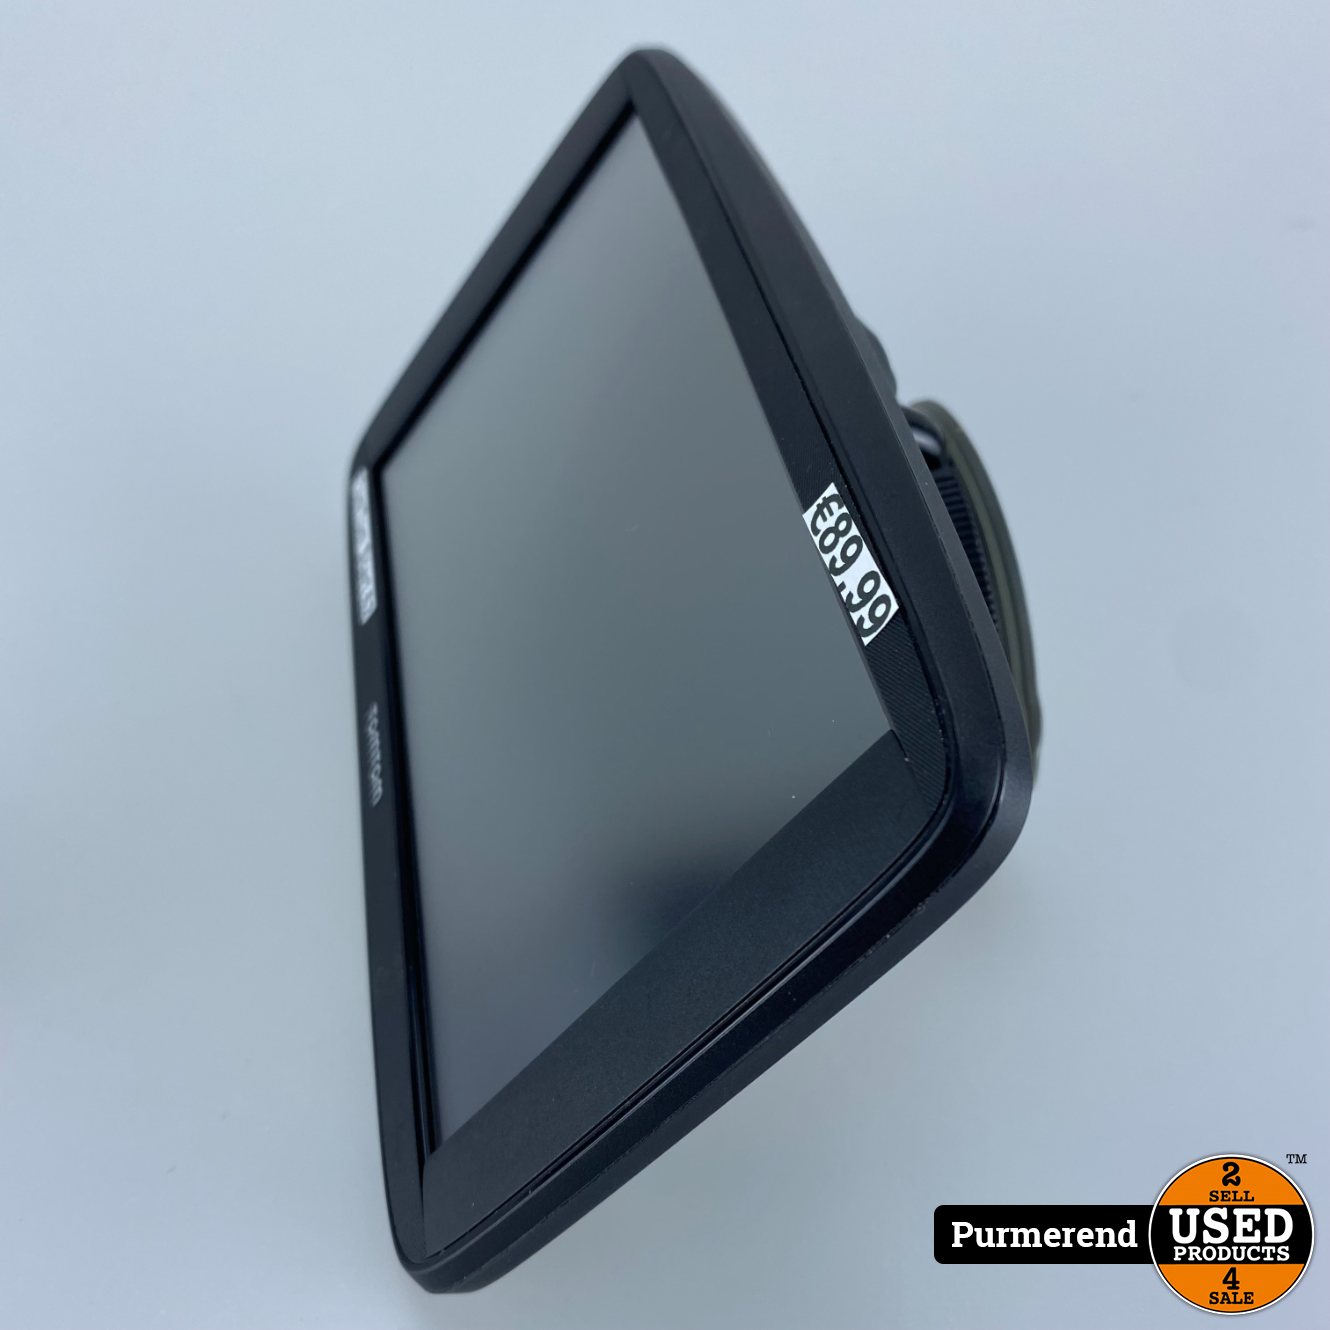 TomTom 62 Zwart - Used Products